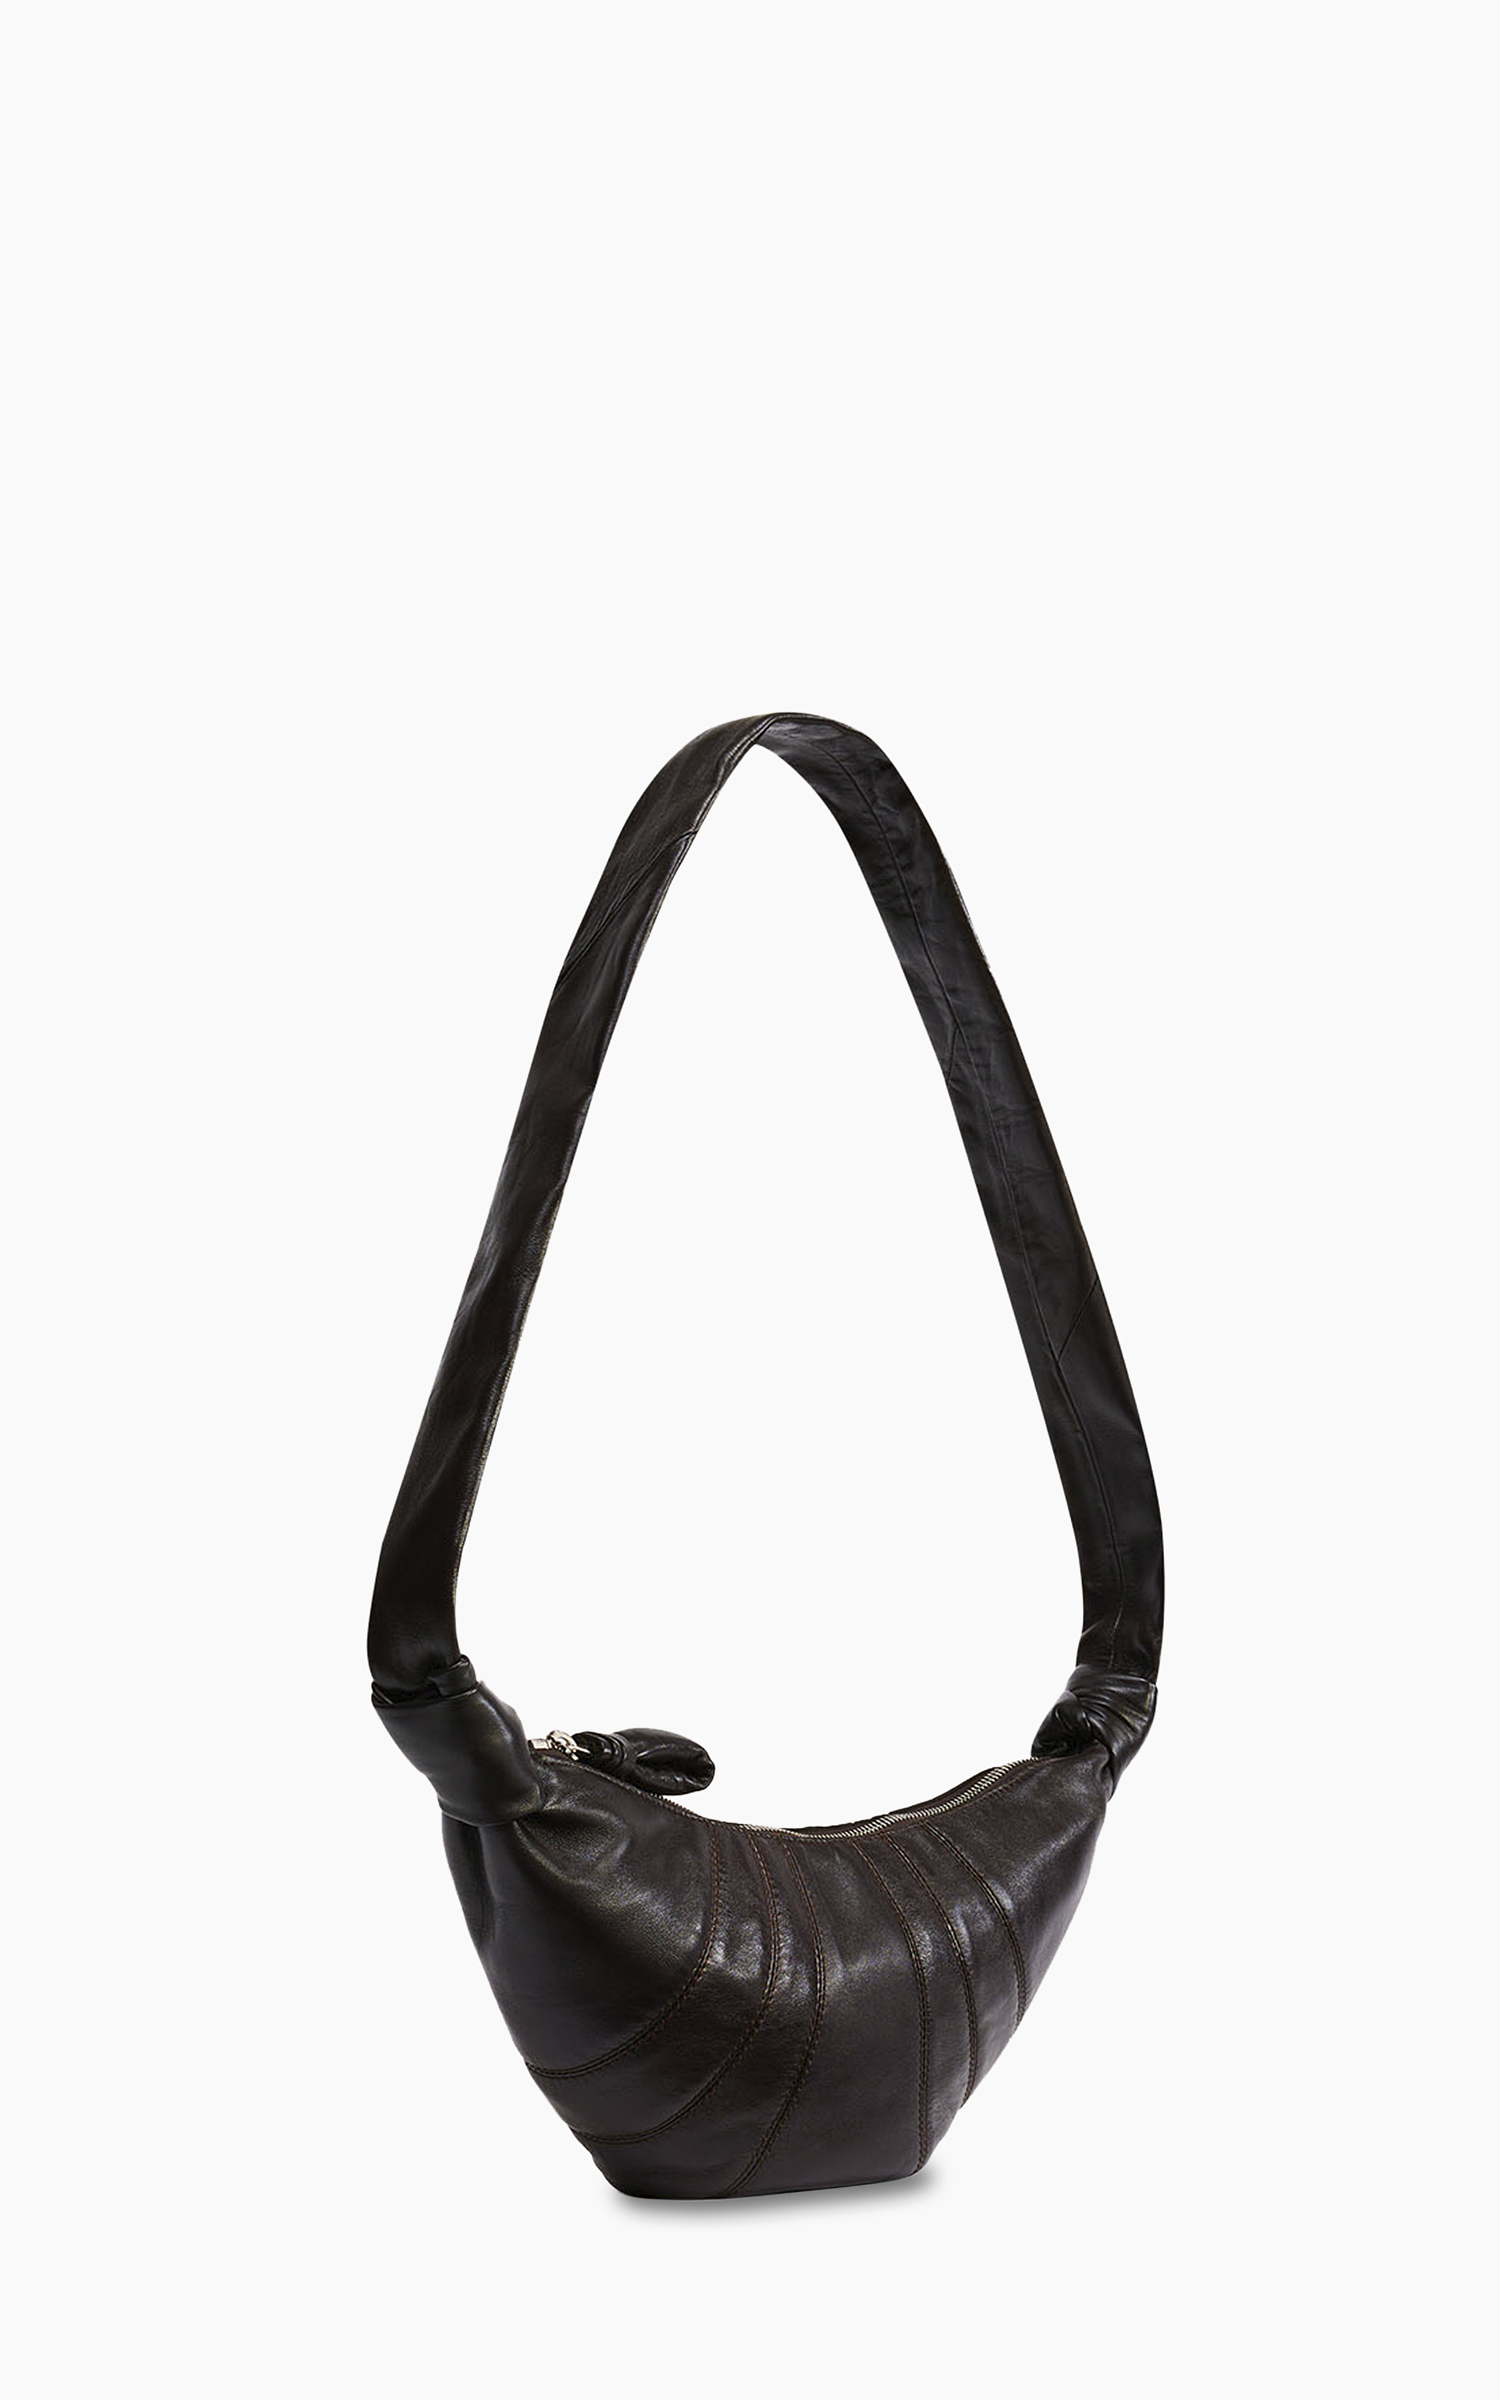 Lemaire Small Croissant Bag Soft Nappa Leather Dark Chocolate | Cultizm